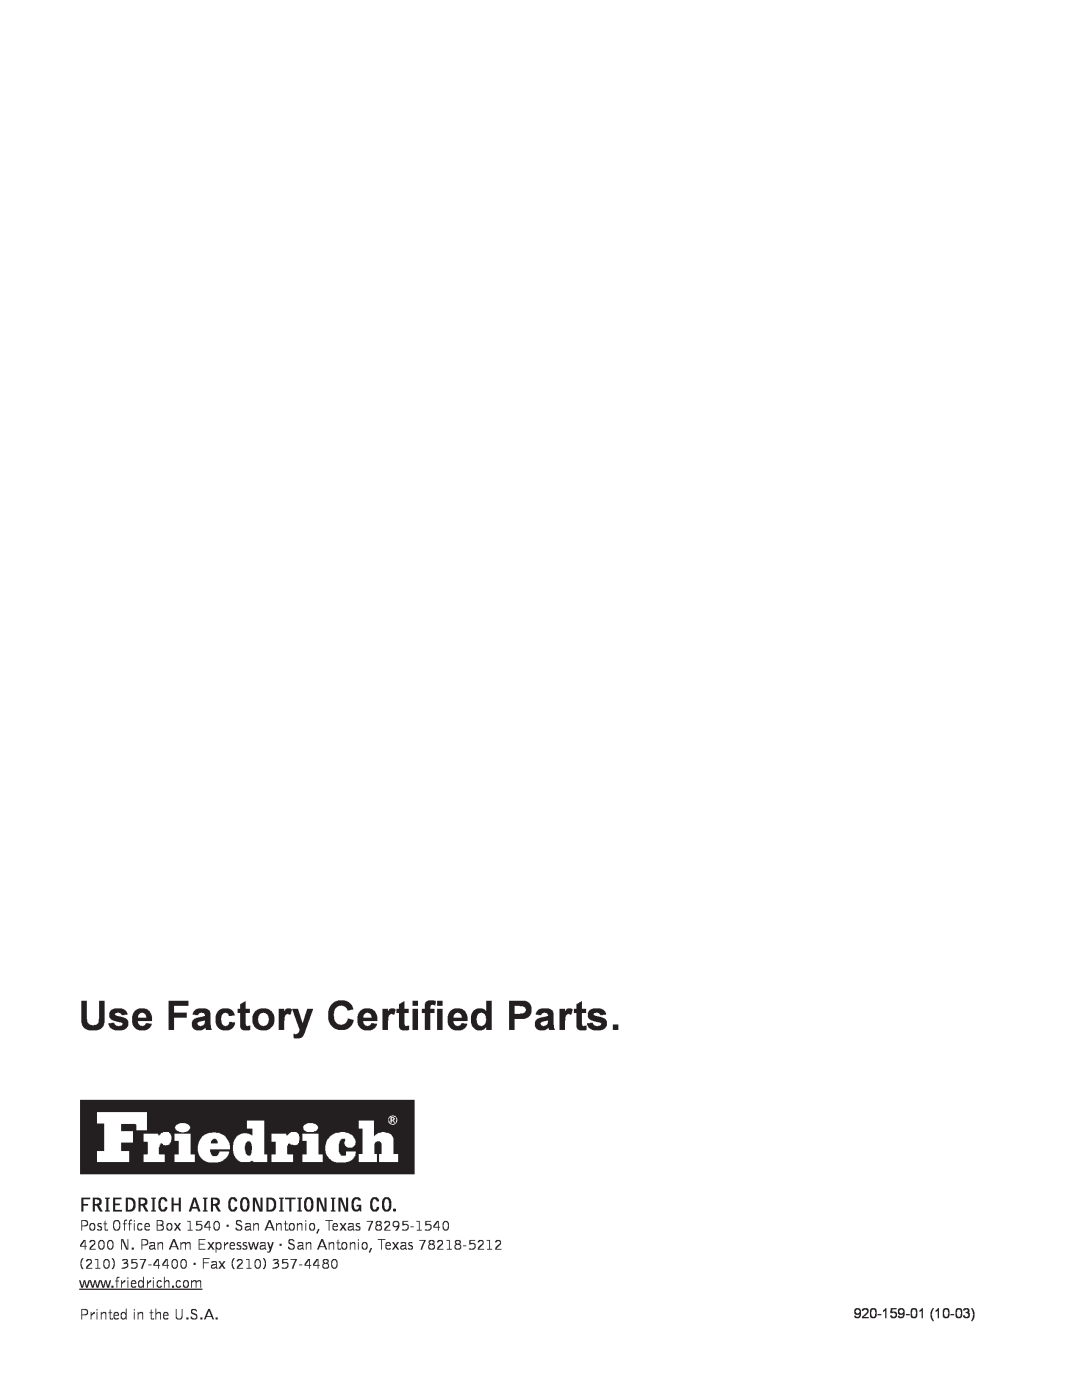 Friedrich 920-159-01 (10-03) operation manual Use Factory Certified Parts, Friedrich Air Conditioning Co 